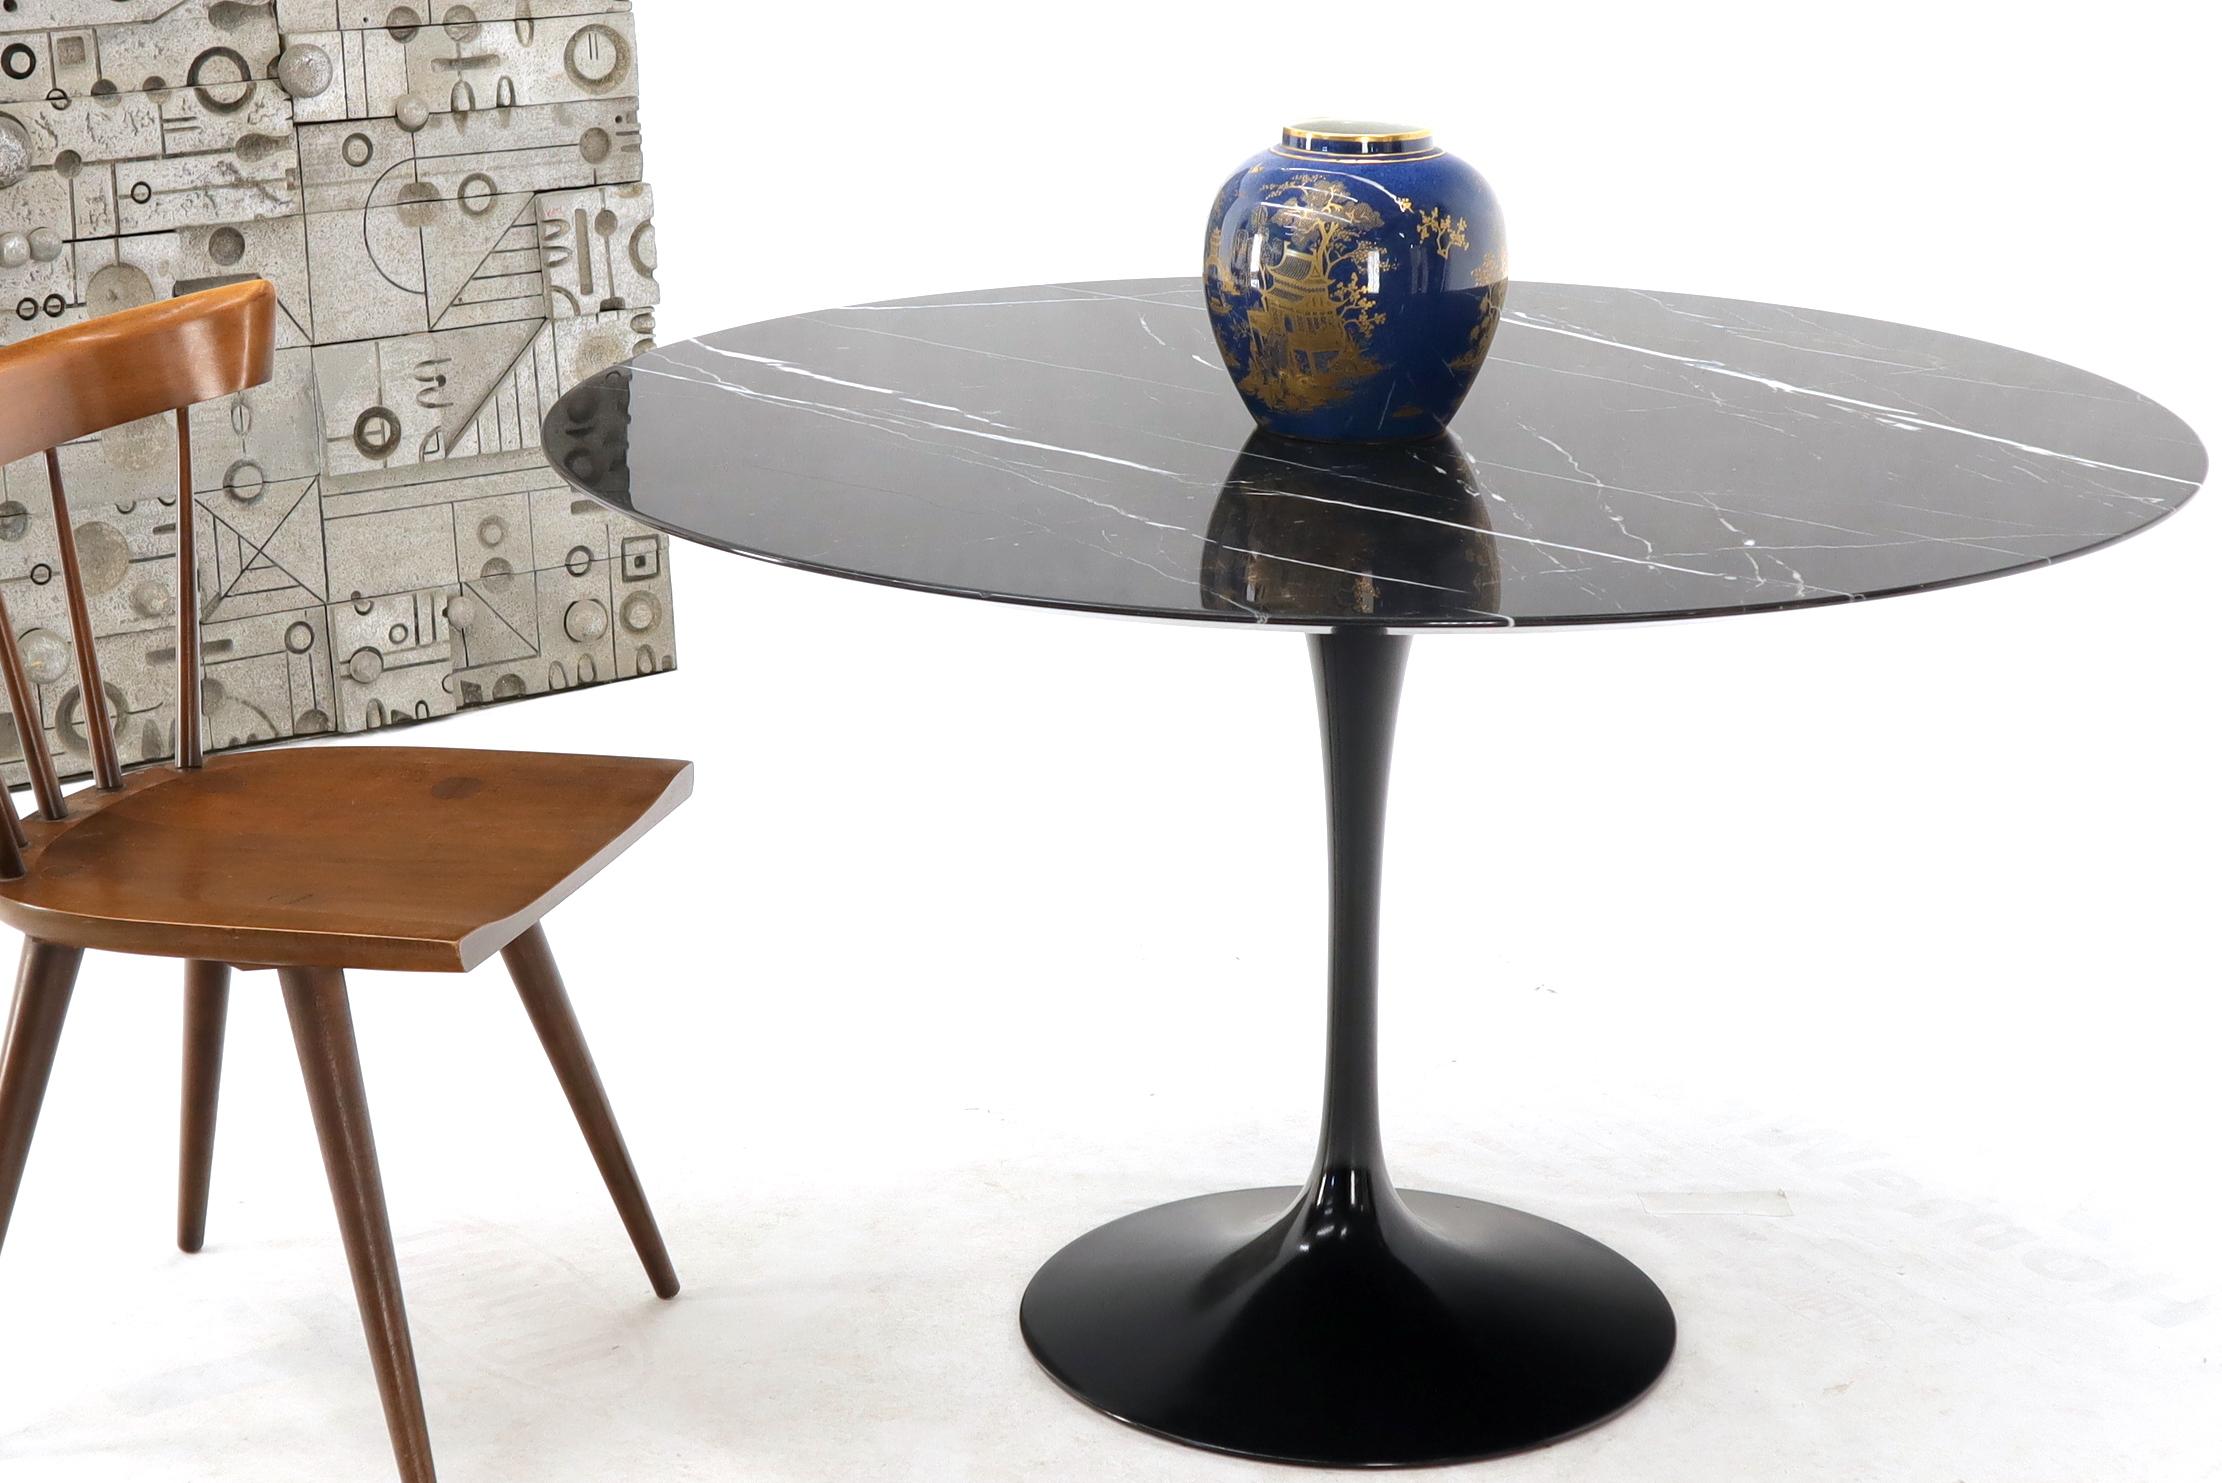 20th Century Large Round Black Marble Top Tulip Base Saarinen for Knoll Dining Table